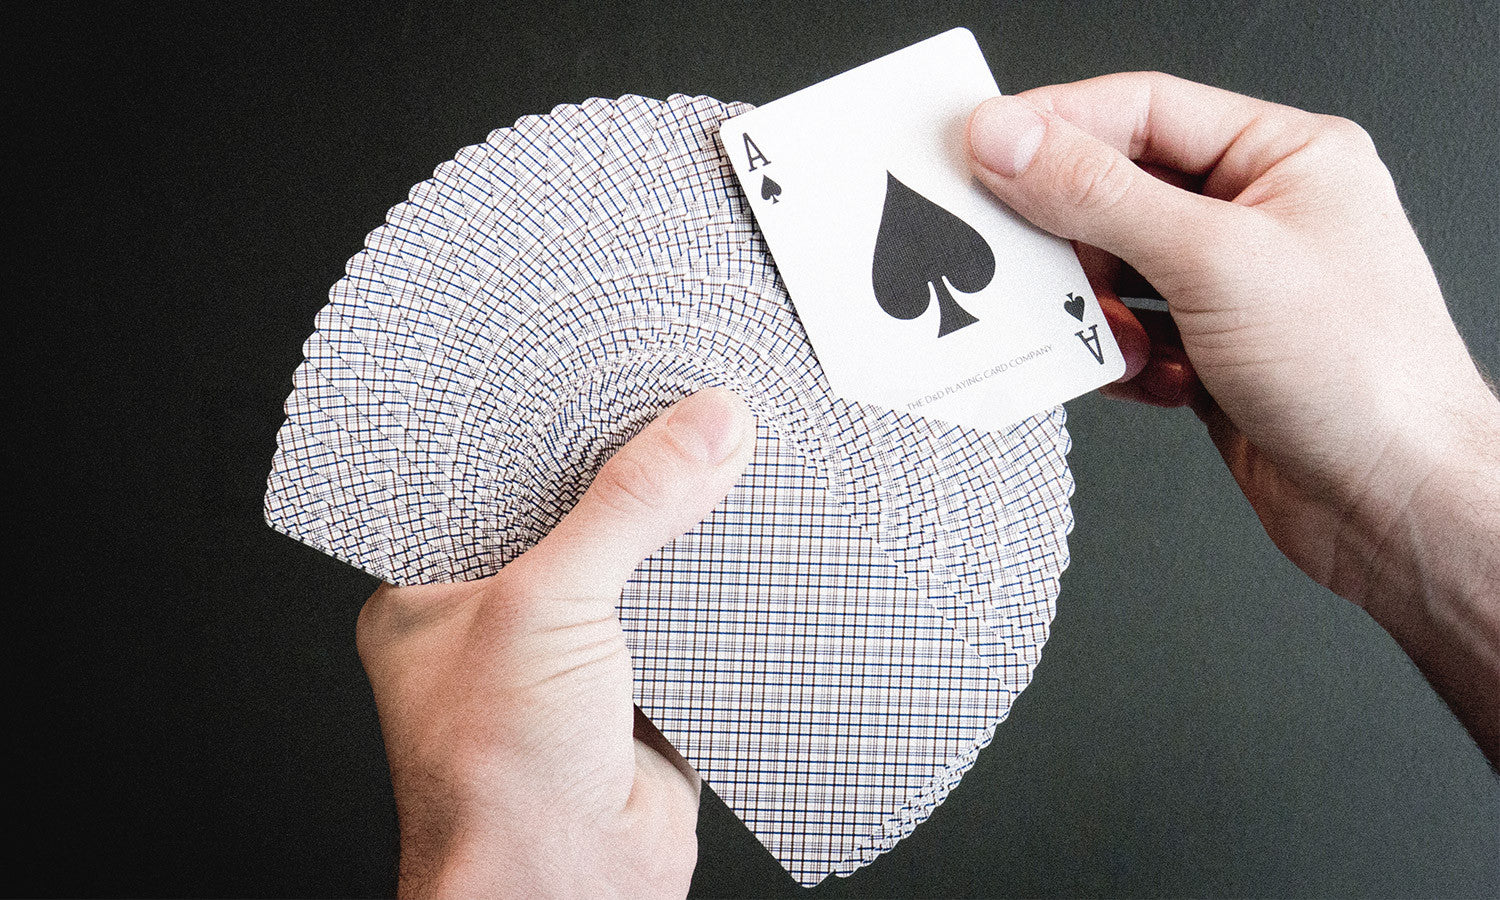 Four aces isn't always a winning hand